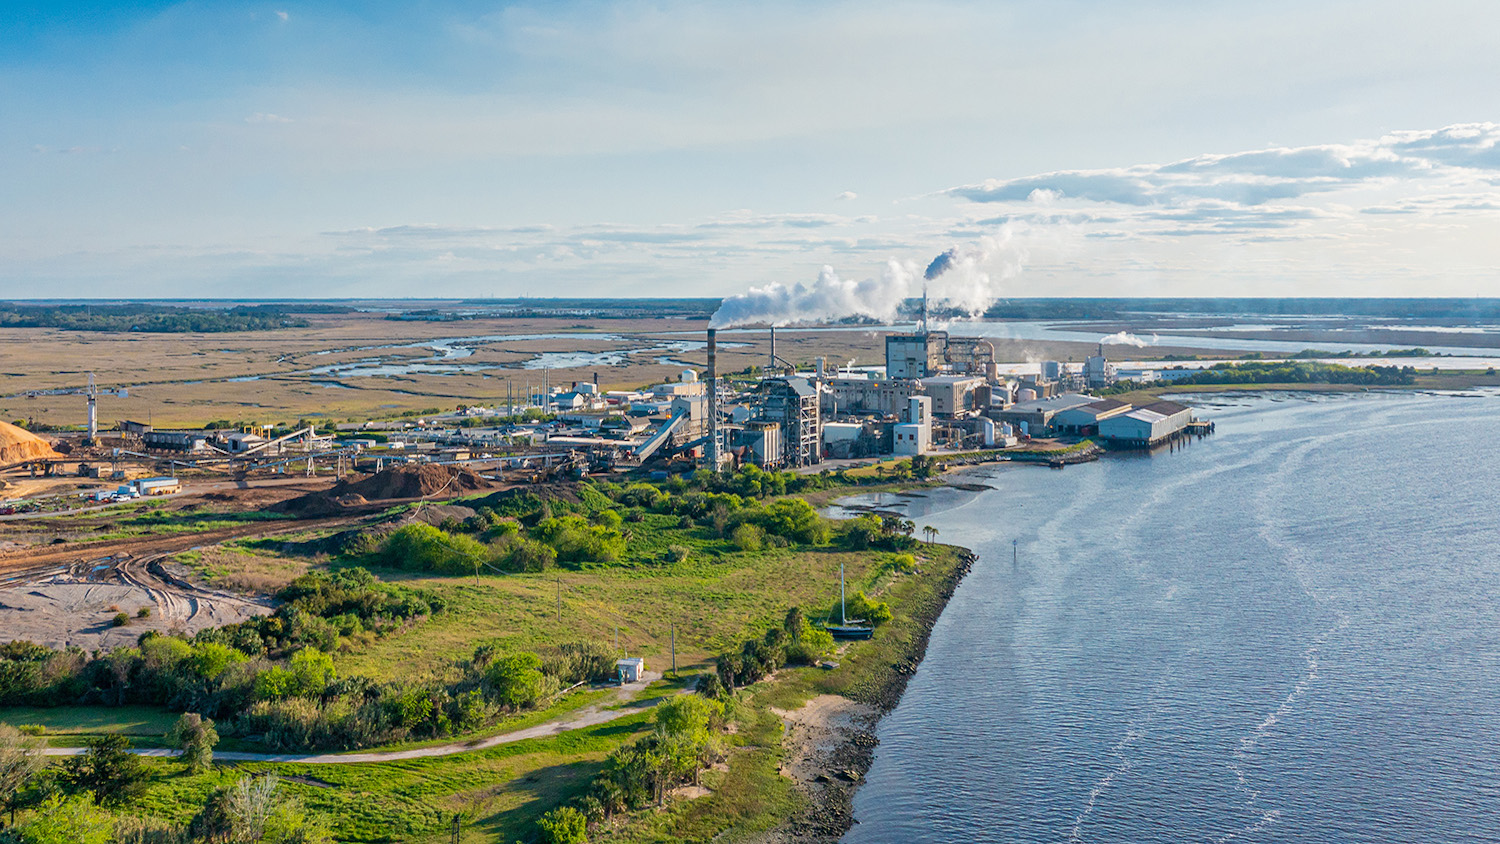 Aerial photo of a paper mill in Fernandina Beach near Jacksonville, Florida - NC State University